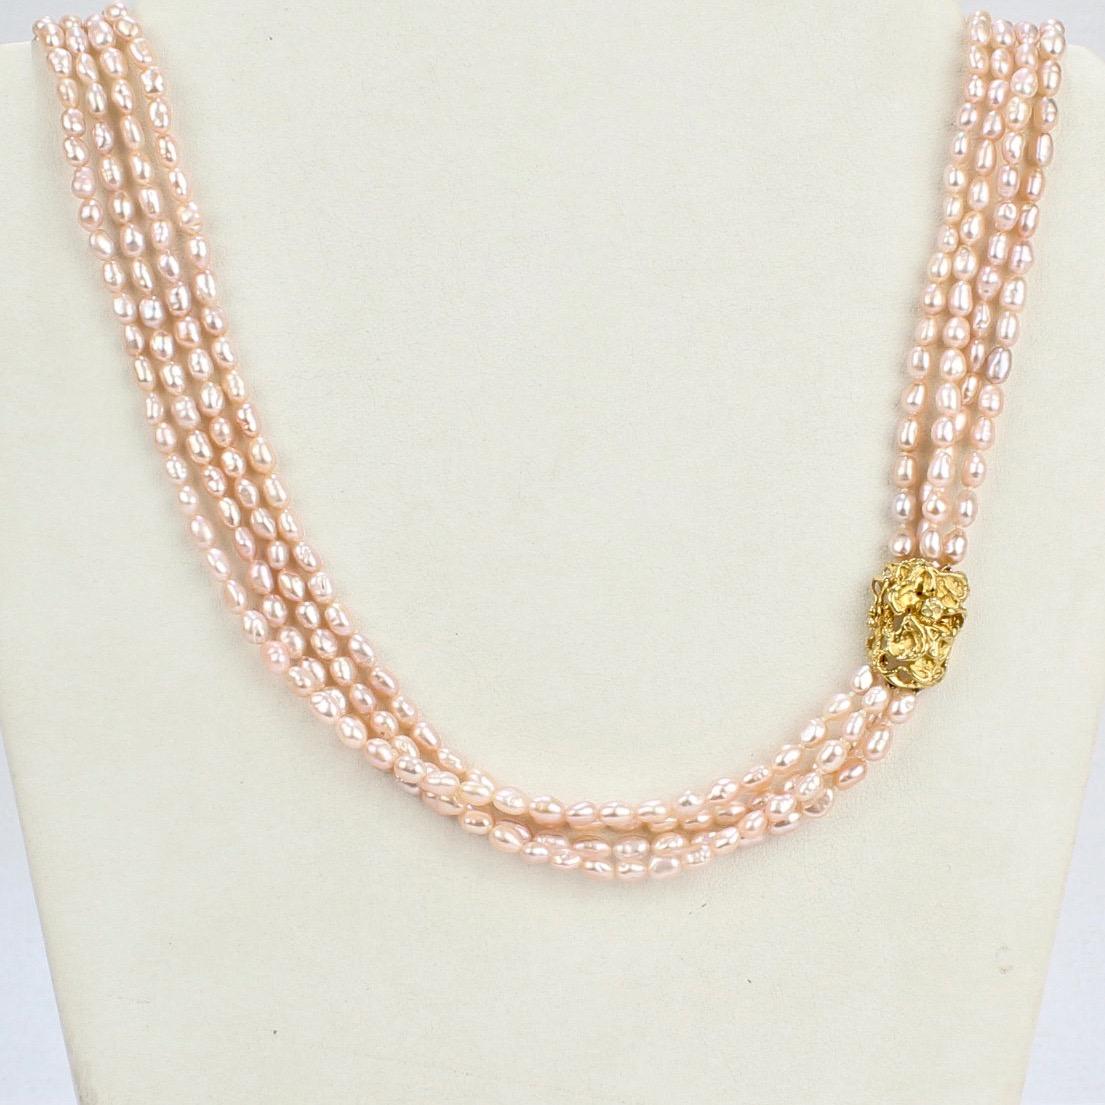 A beautifully designed Arthur King necklace in 18 karat gold and fresh water pearls.

The four strand necklace is strung with fresh water pearls with a slight pink to white hue and set with an 18K gold Brutalist clasp. 

With a great length that